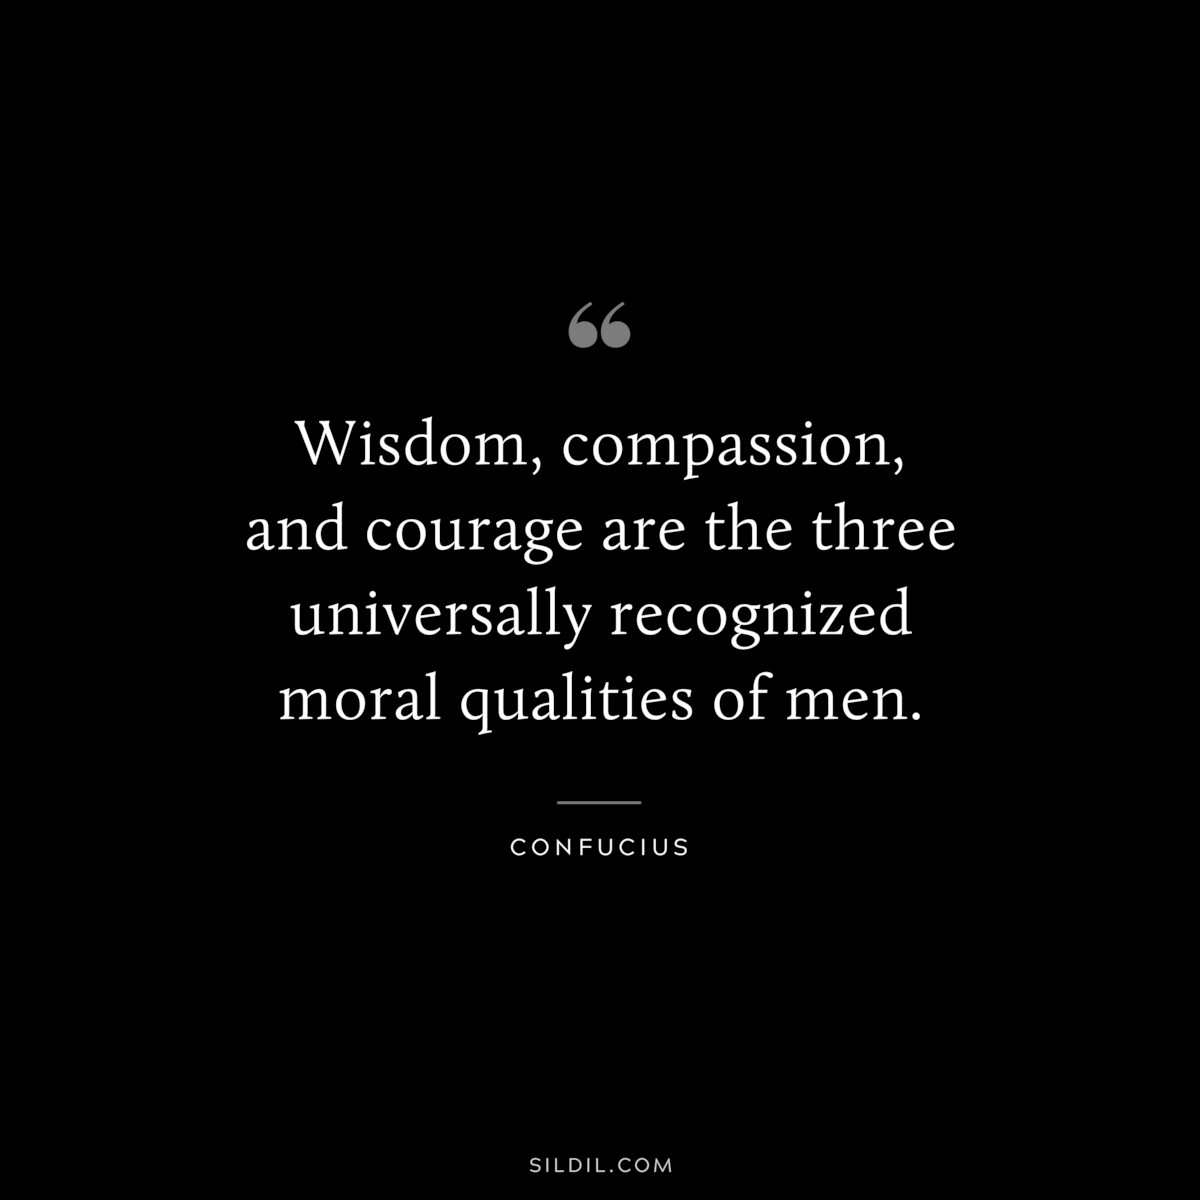 Wisdom, compassion, and courage are the three universally recognized moral qualities of men. ― Confucius